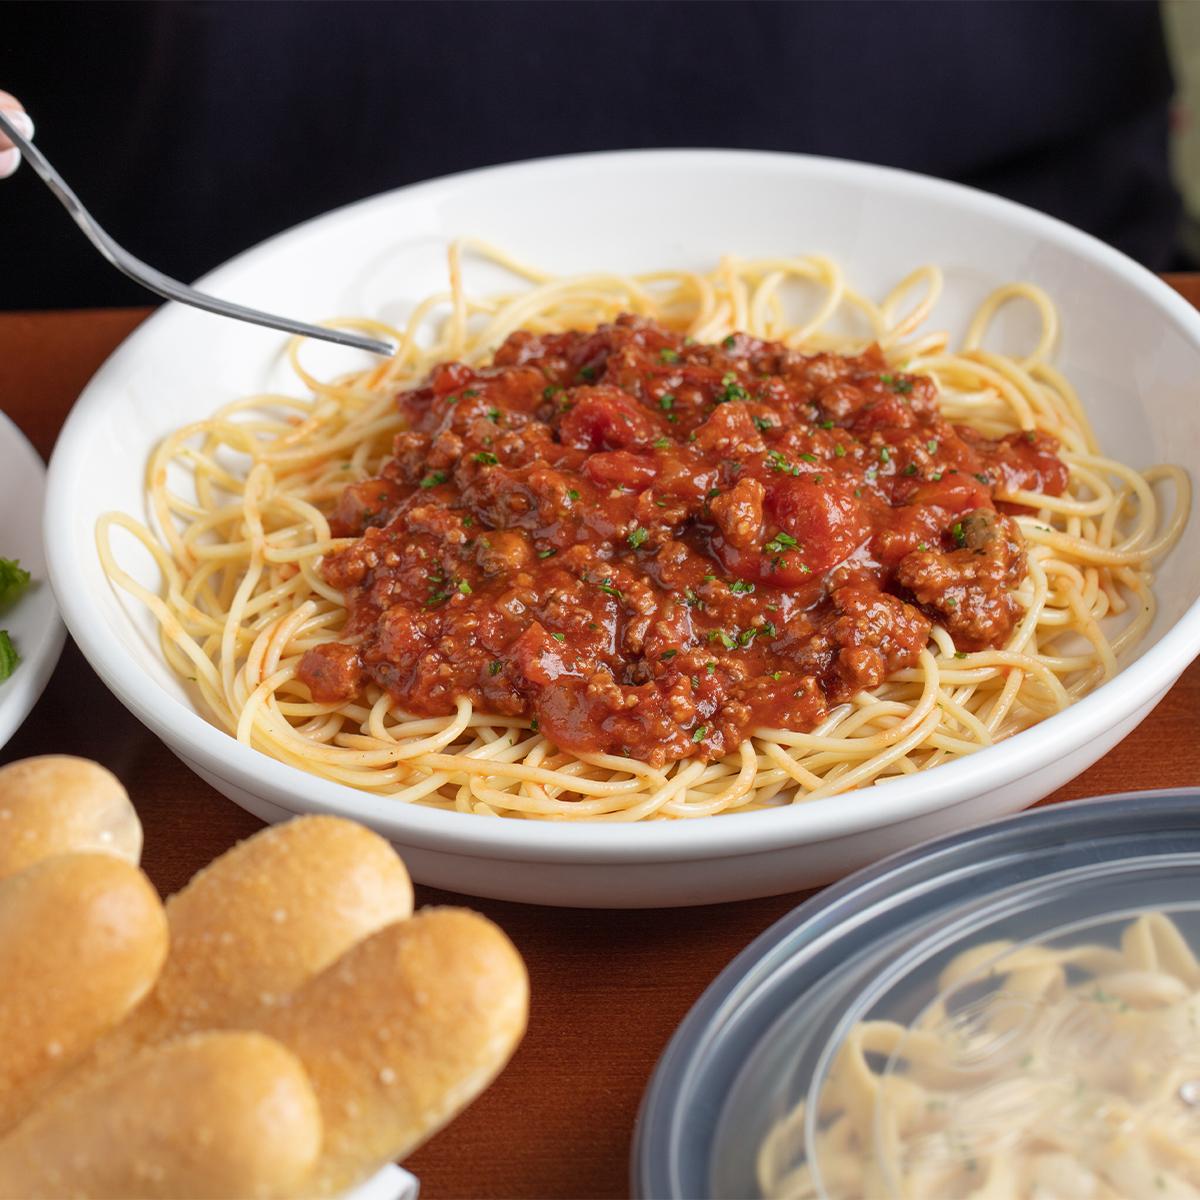 Olive Garden On Twitter With 5 Take Home Entrees You Can Have